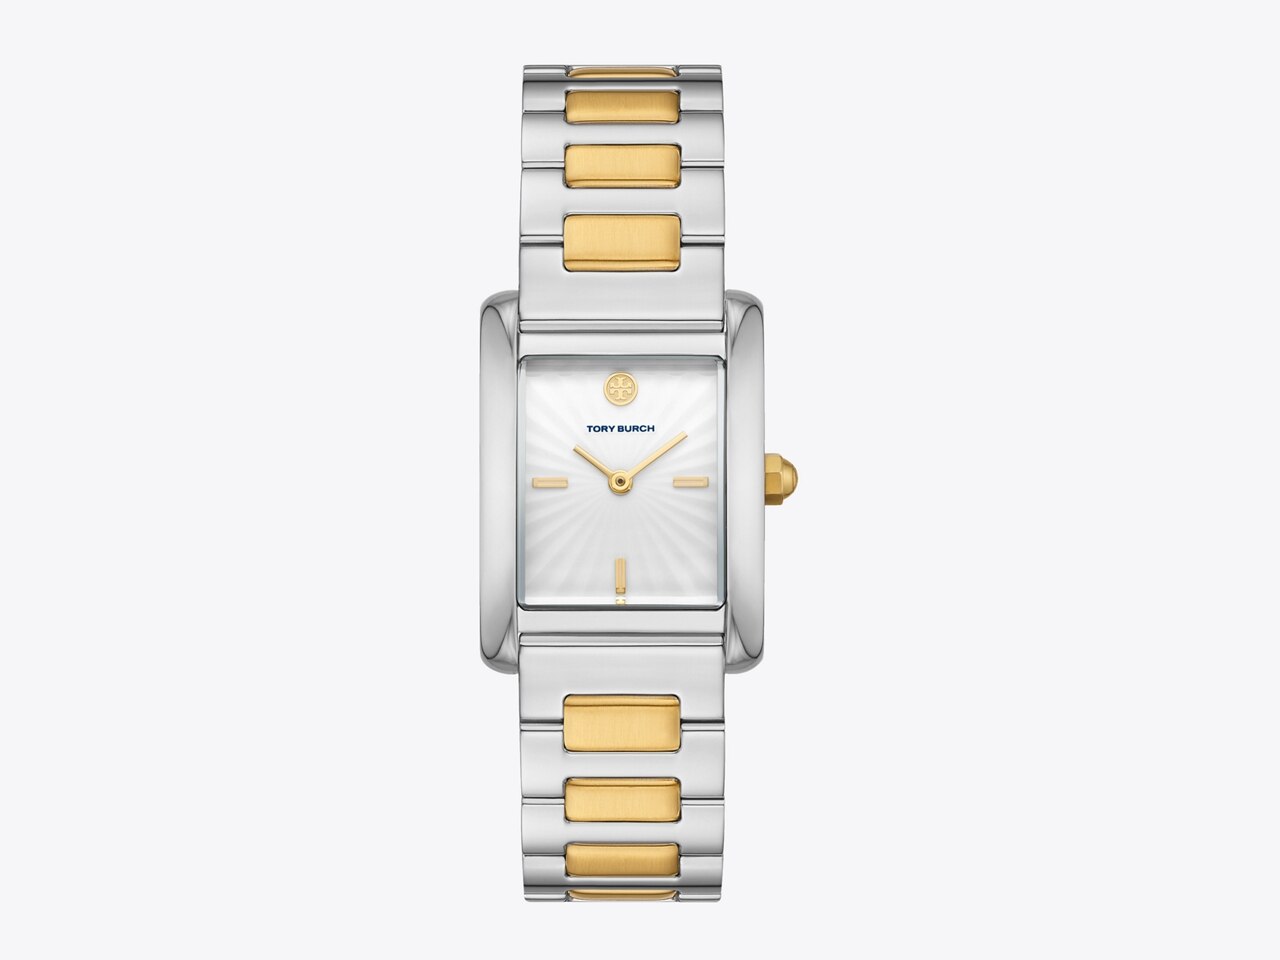 Eleanor Watch, Gold-Tone Stainless Steel: Women's Watches, Strap Watches